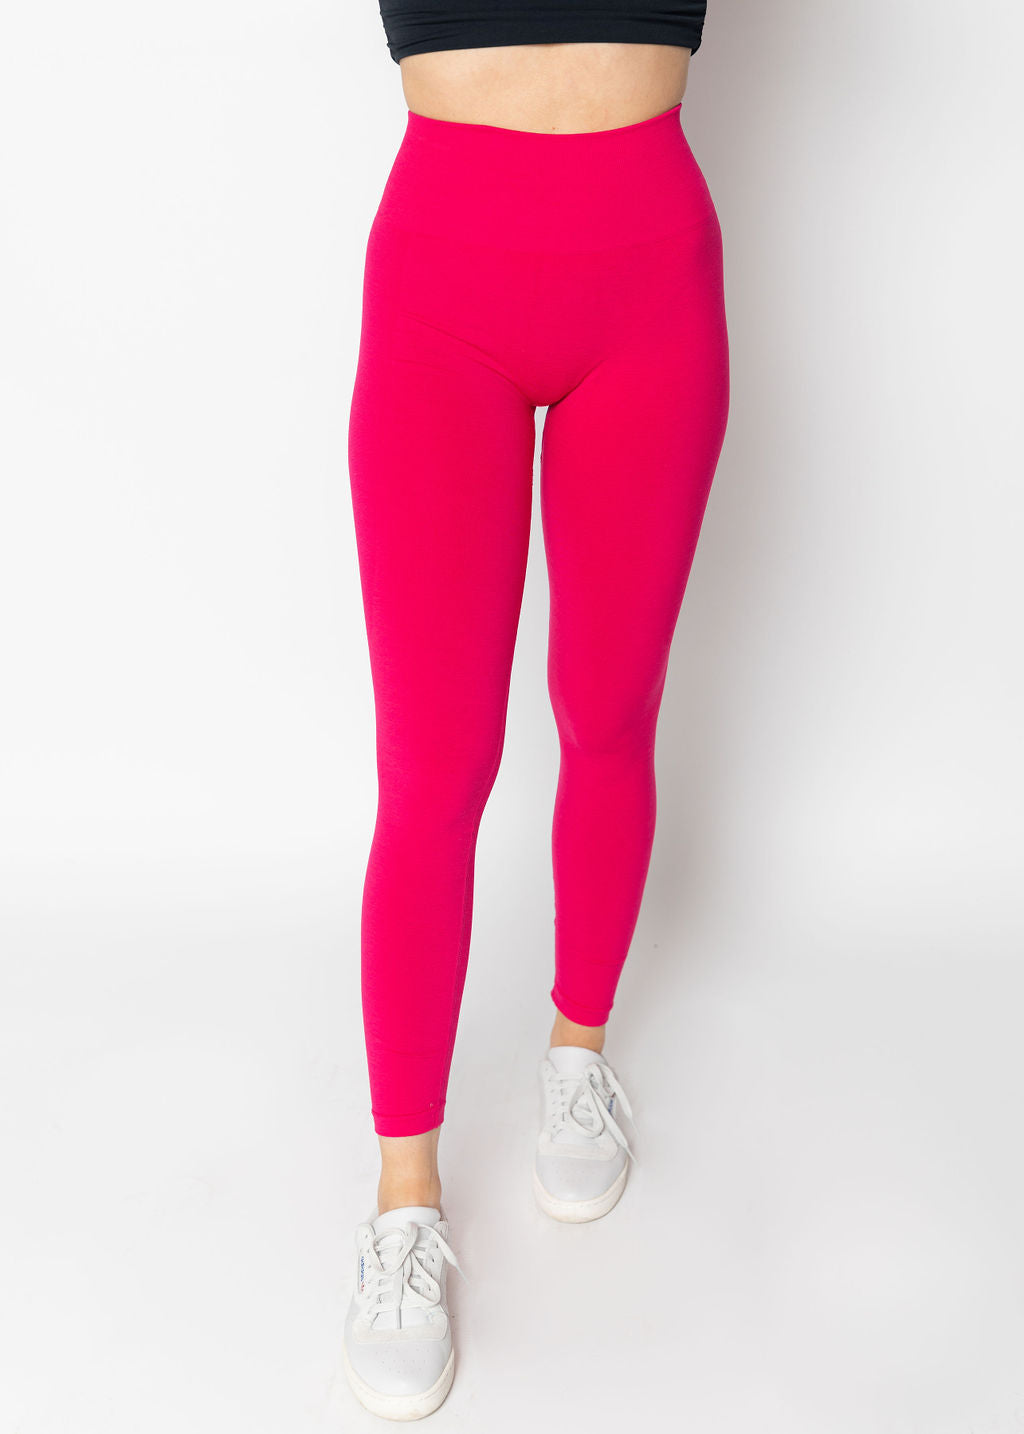 Prisma's Dusty Pink Churidar Leggings for Comfortable and Stylish Look